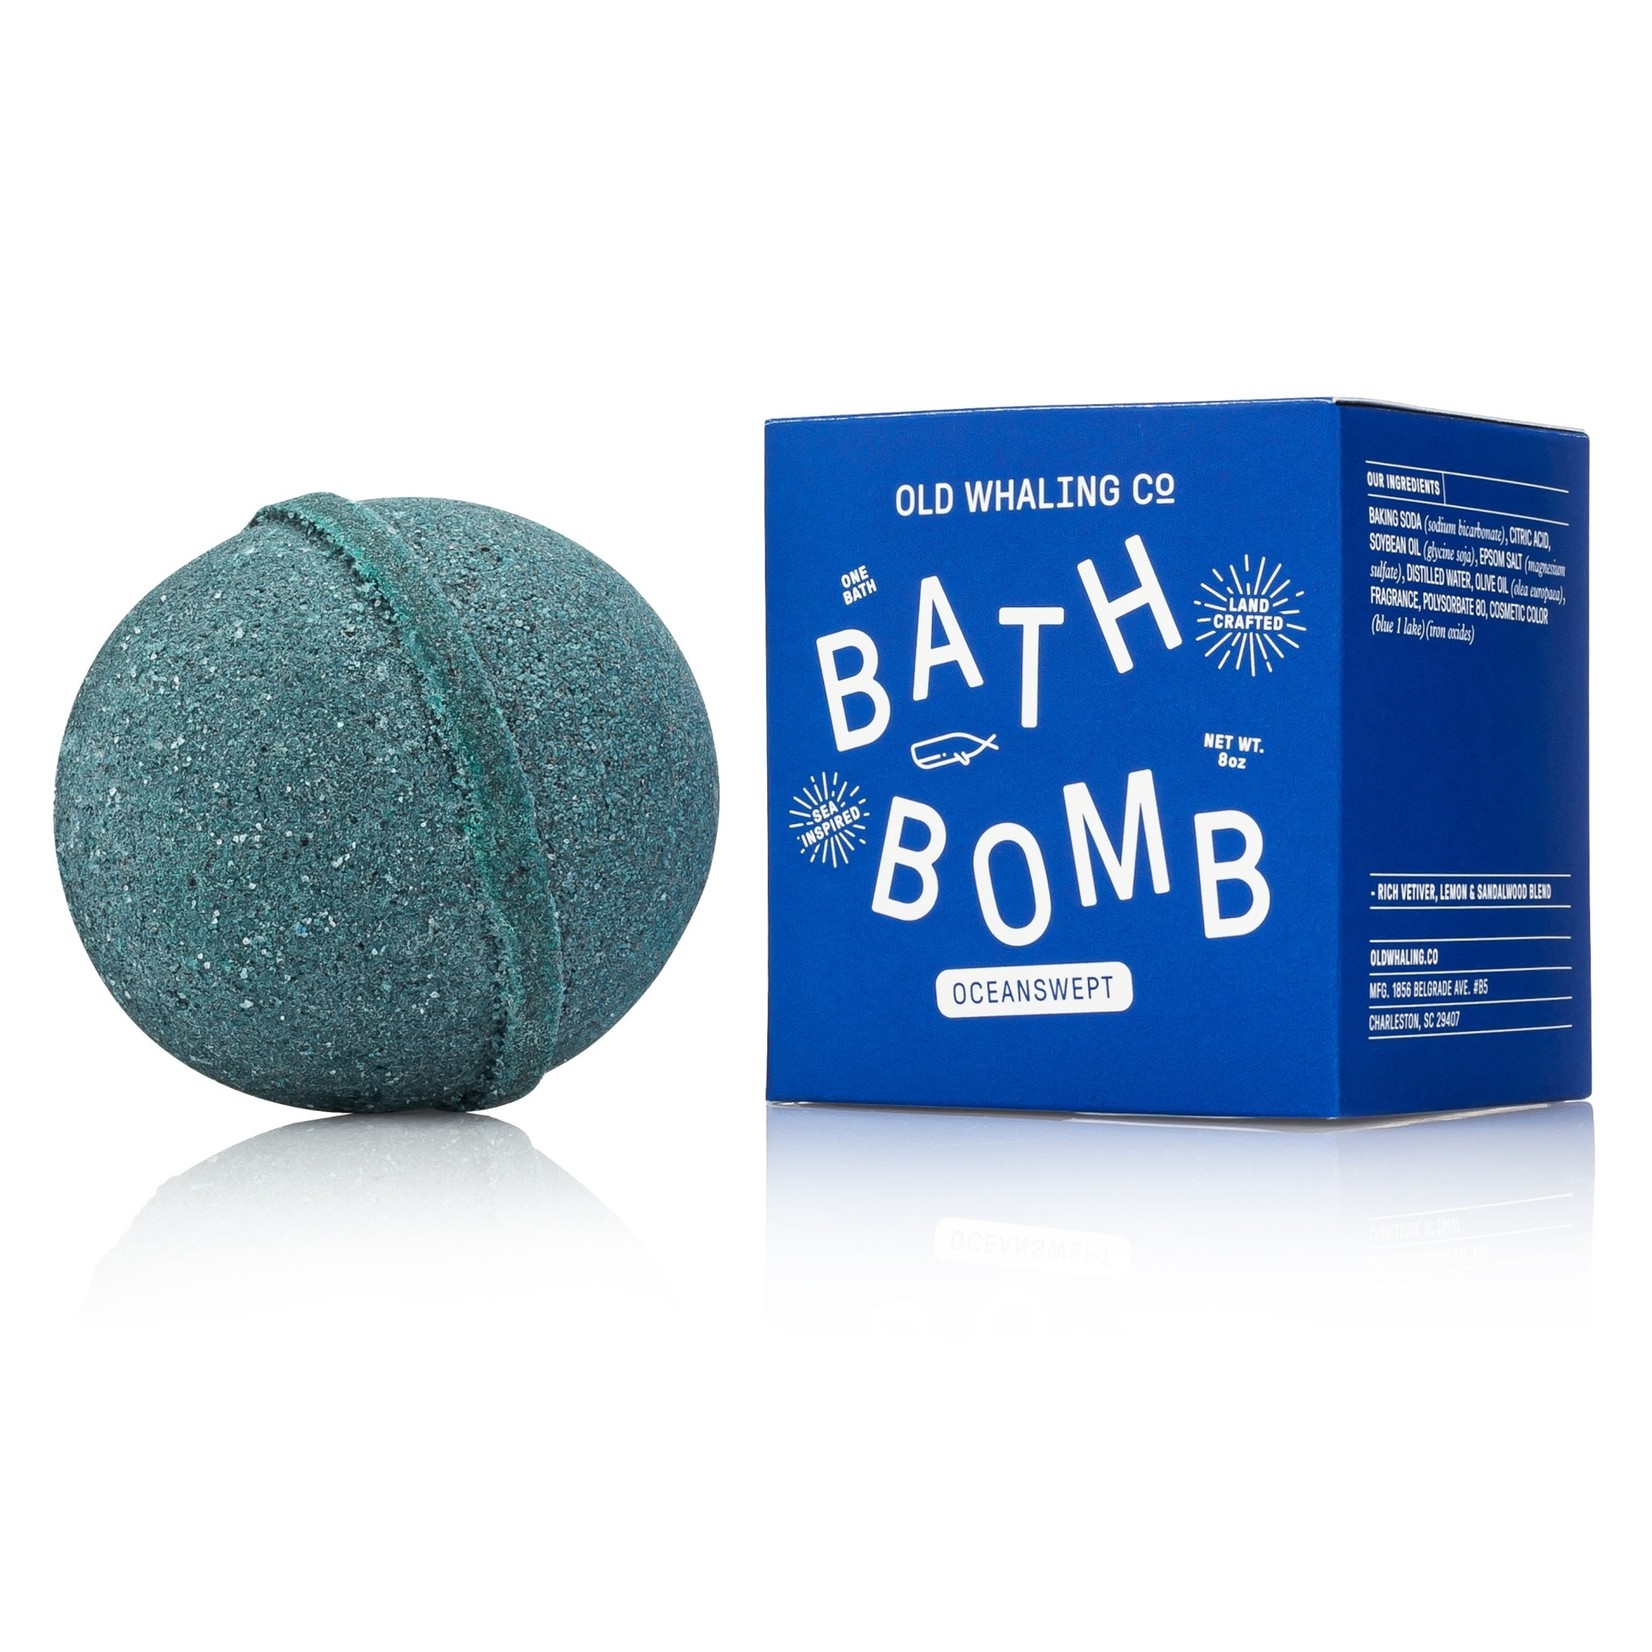 Old Whaling Company Old Whaling Bath Bomb Oceanswept